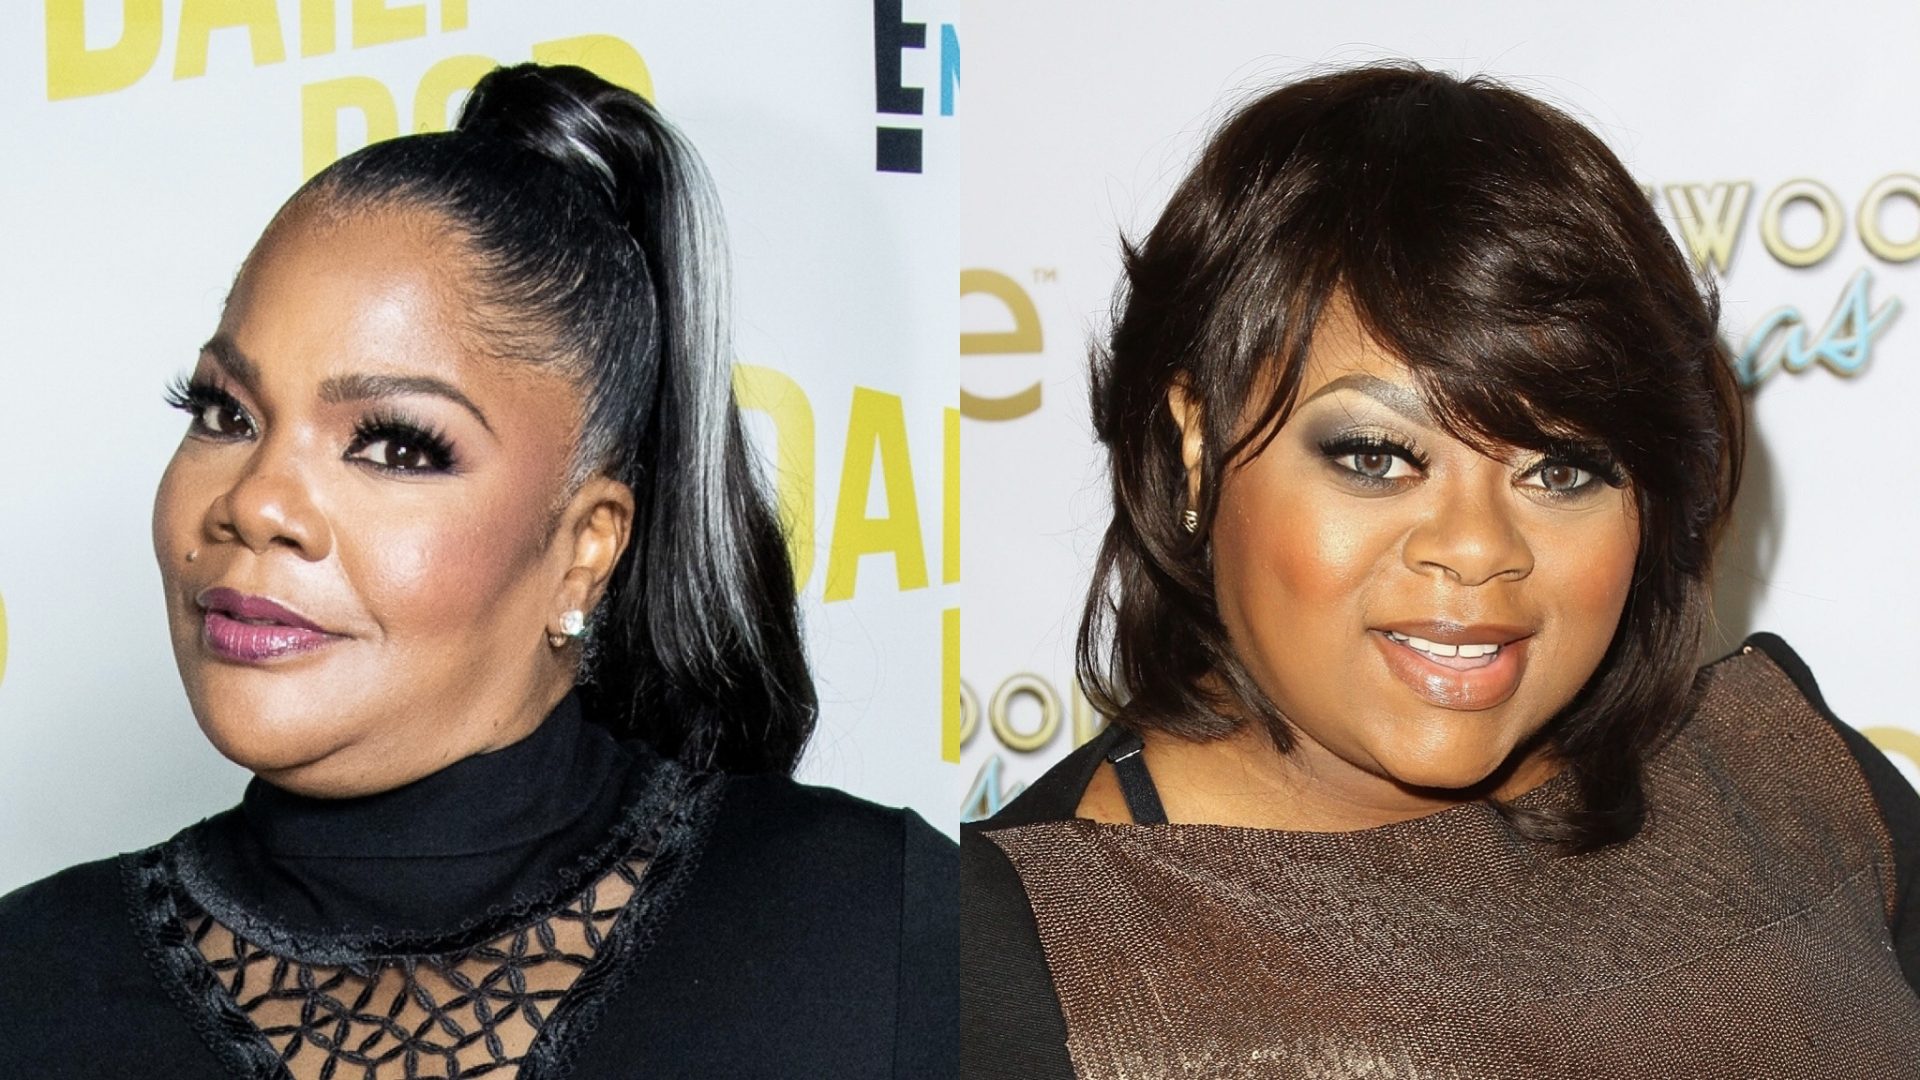 WATCH: Mo’Nique Calls On CBS To Relatively Compensate Her & Countess Vaughn For Their Time On ‘The Parkers’